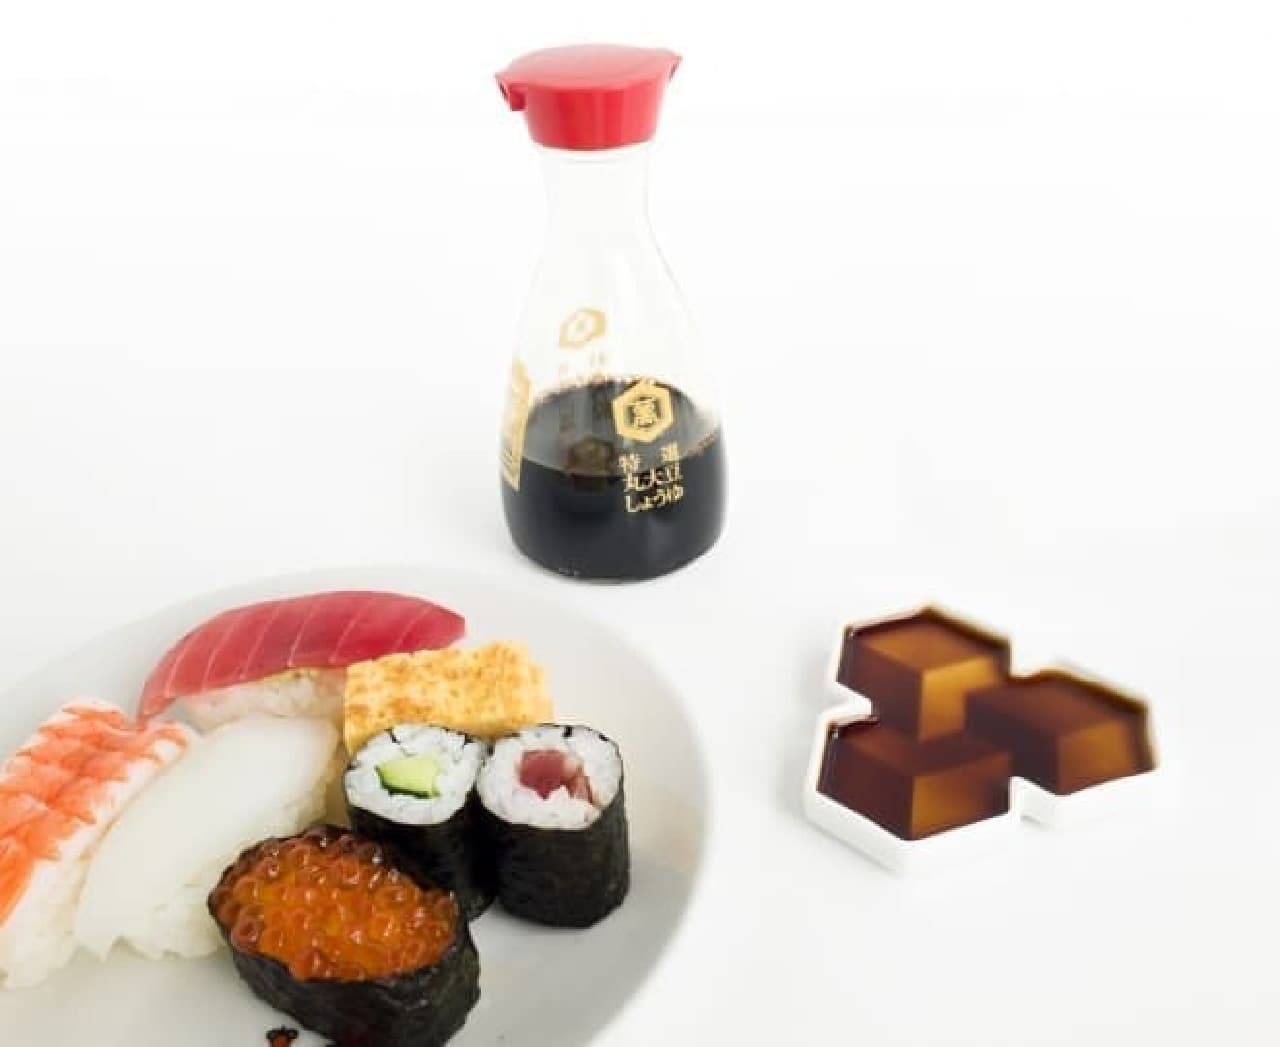 Soy sauce dish "Soy Shape" to enjoy the color of soy sauce